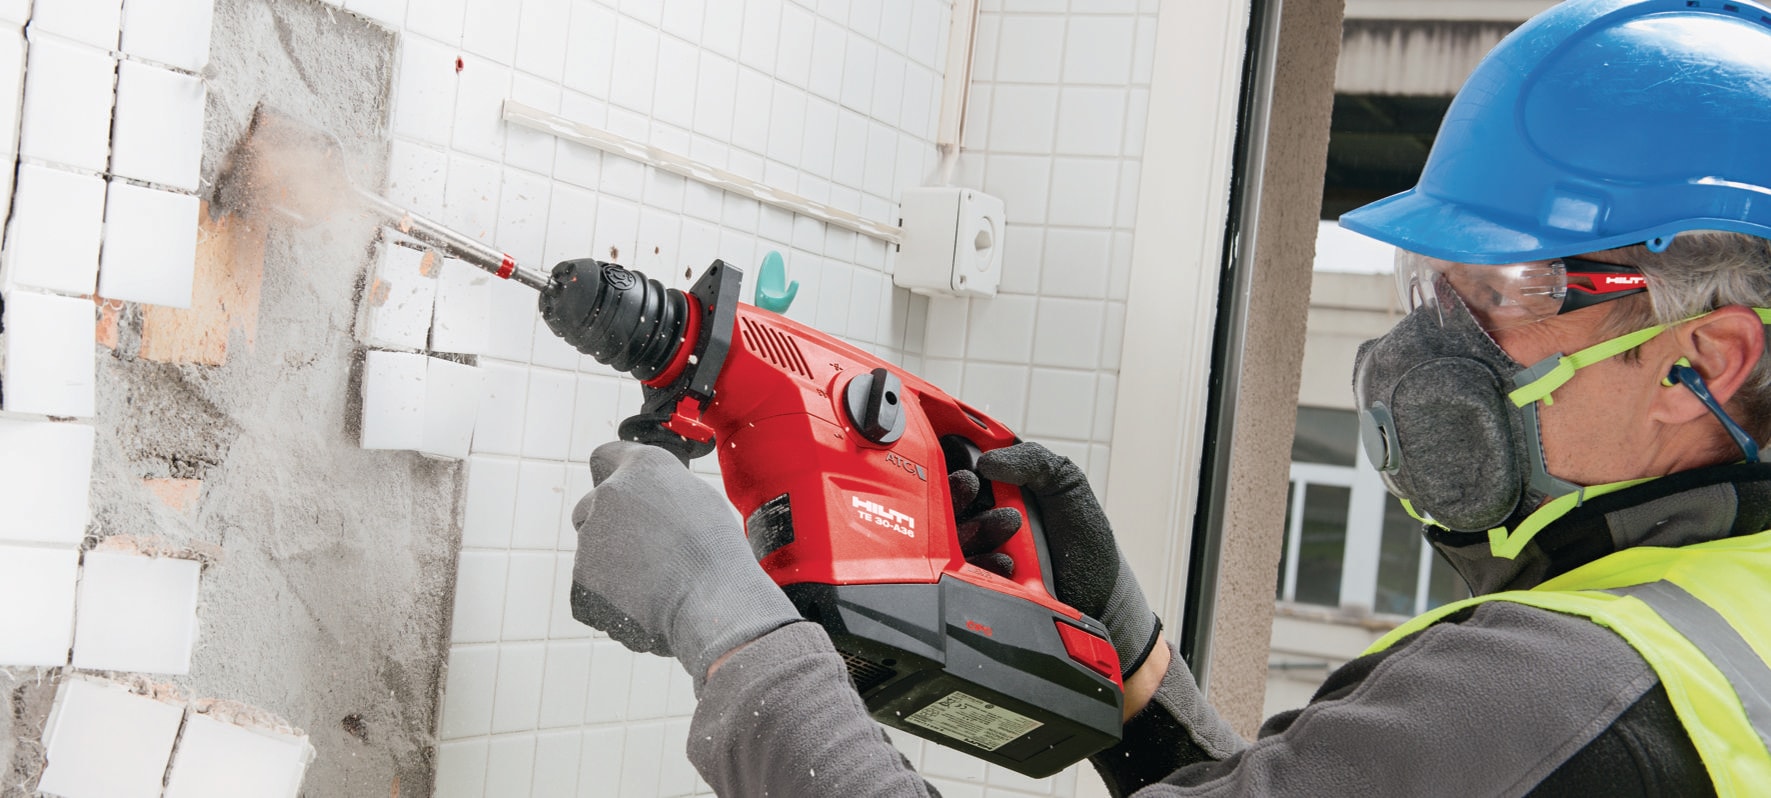 TE 30-A36 Cordless rotary hammer - Cordless SDS Plus Rotary 